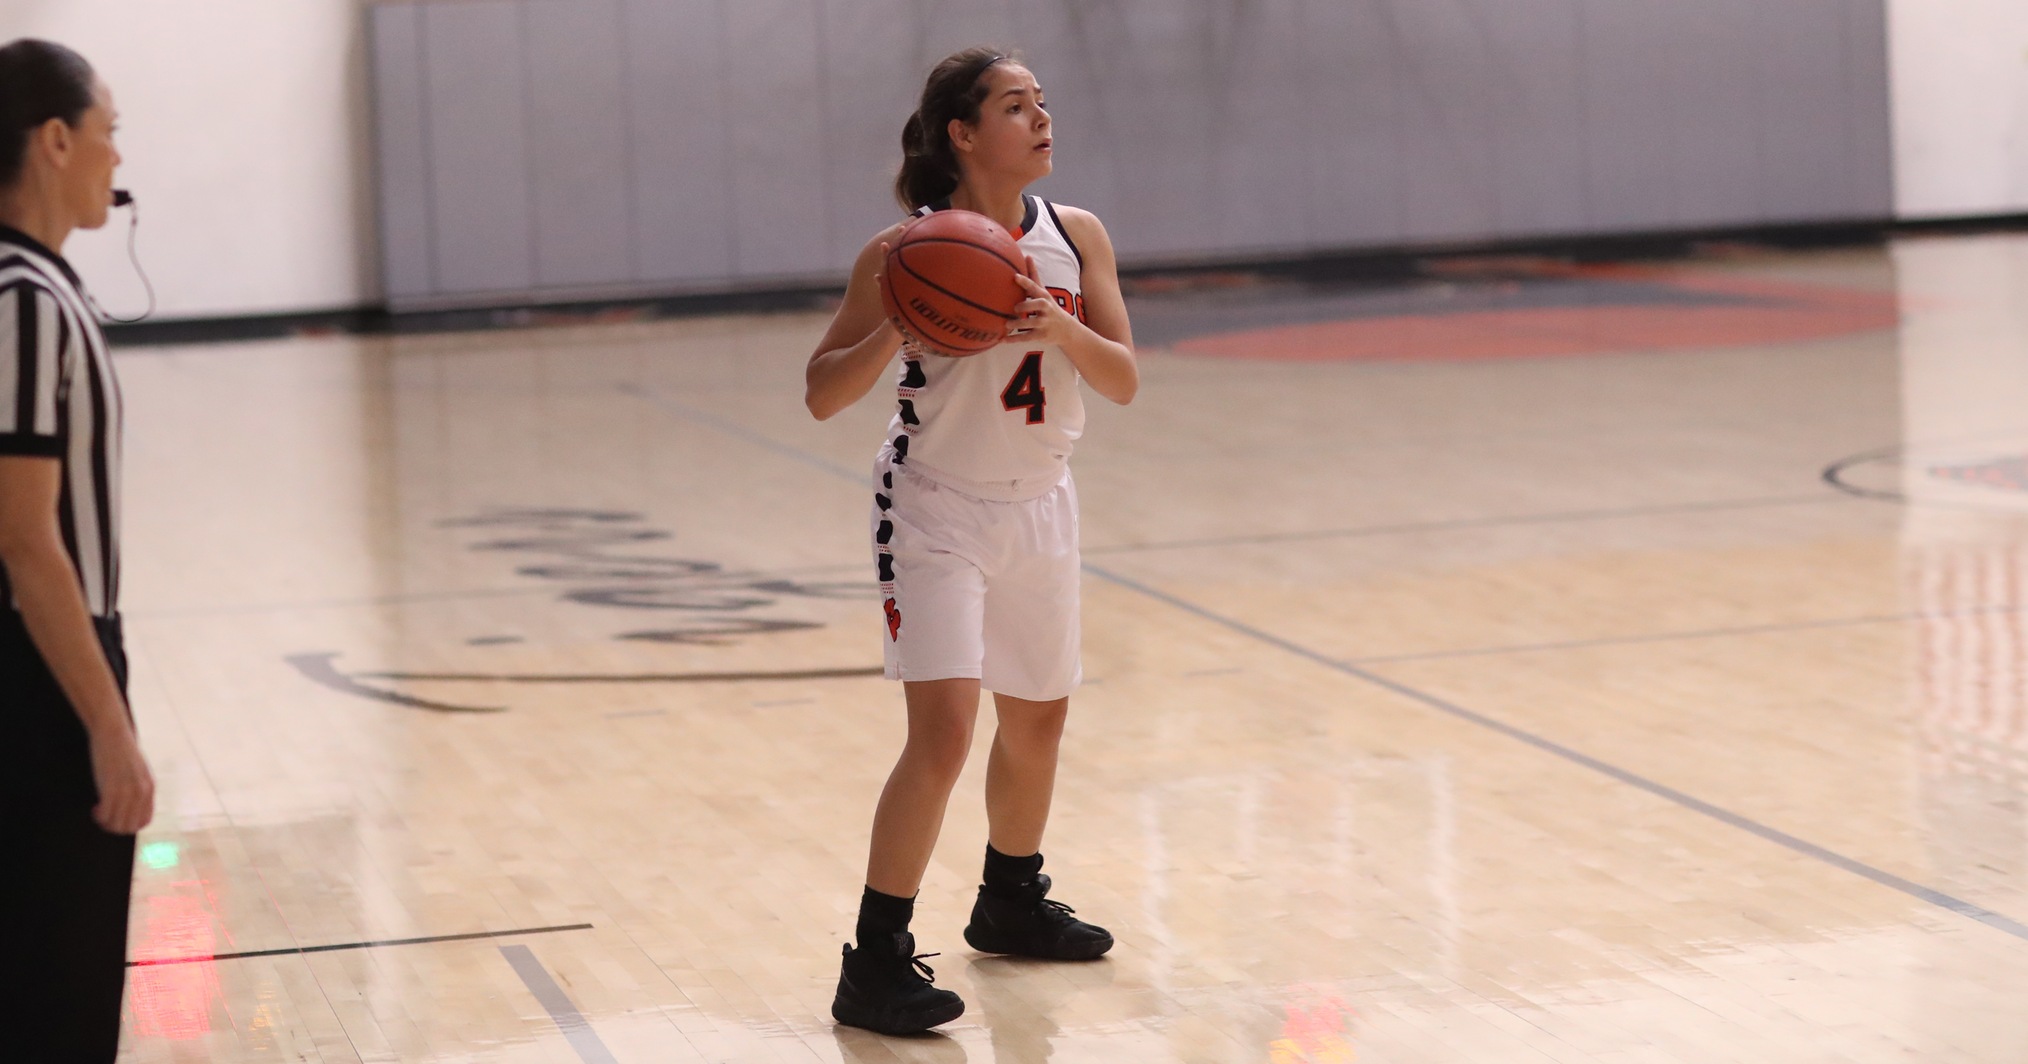 Adriana Garcia recorded a career-high 21 points in a comeback victory against Orange Coast on Wednesday night. (Photo by Bobby R. Hester)